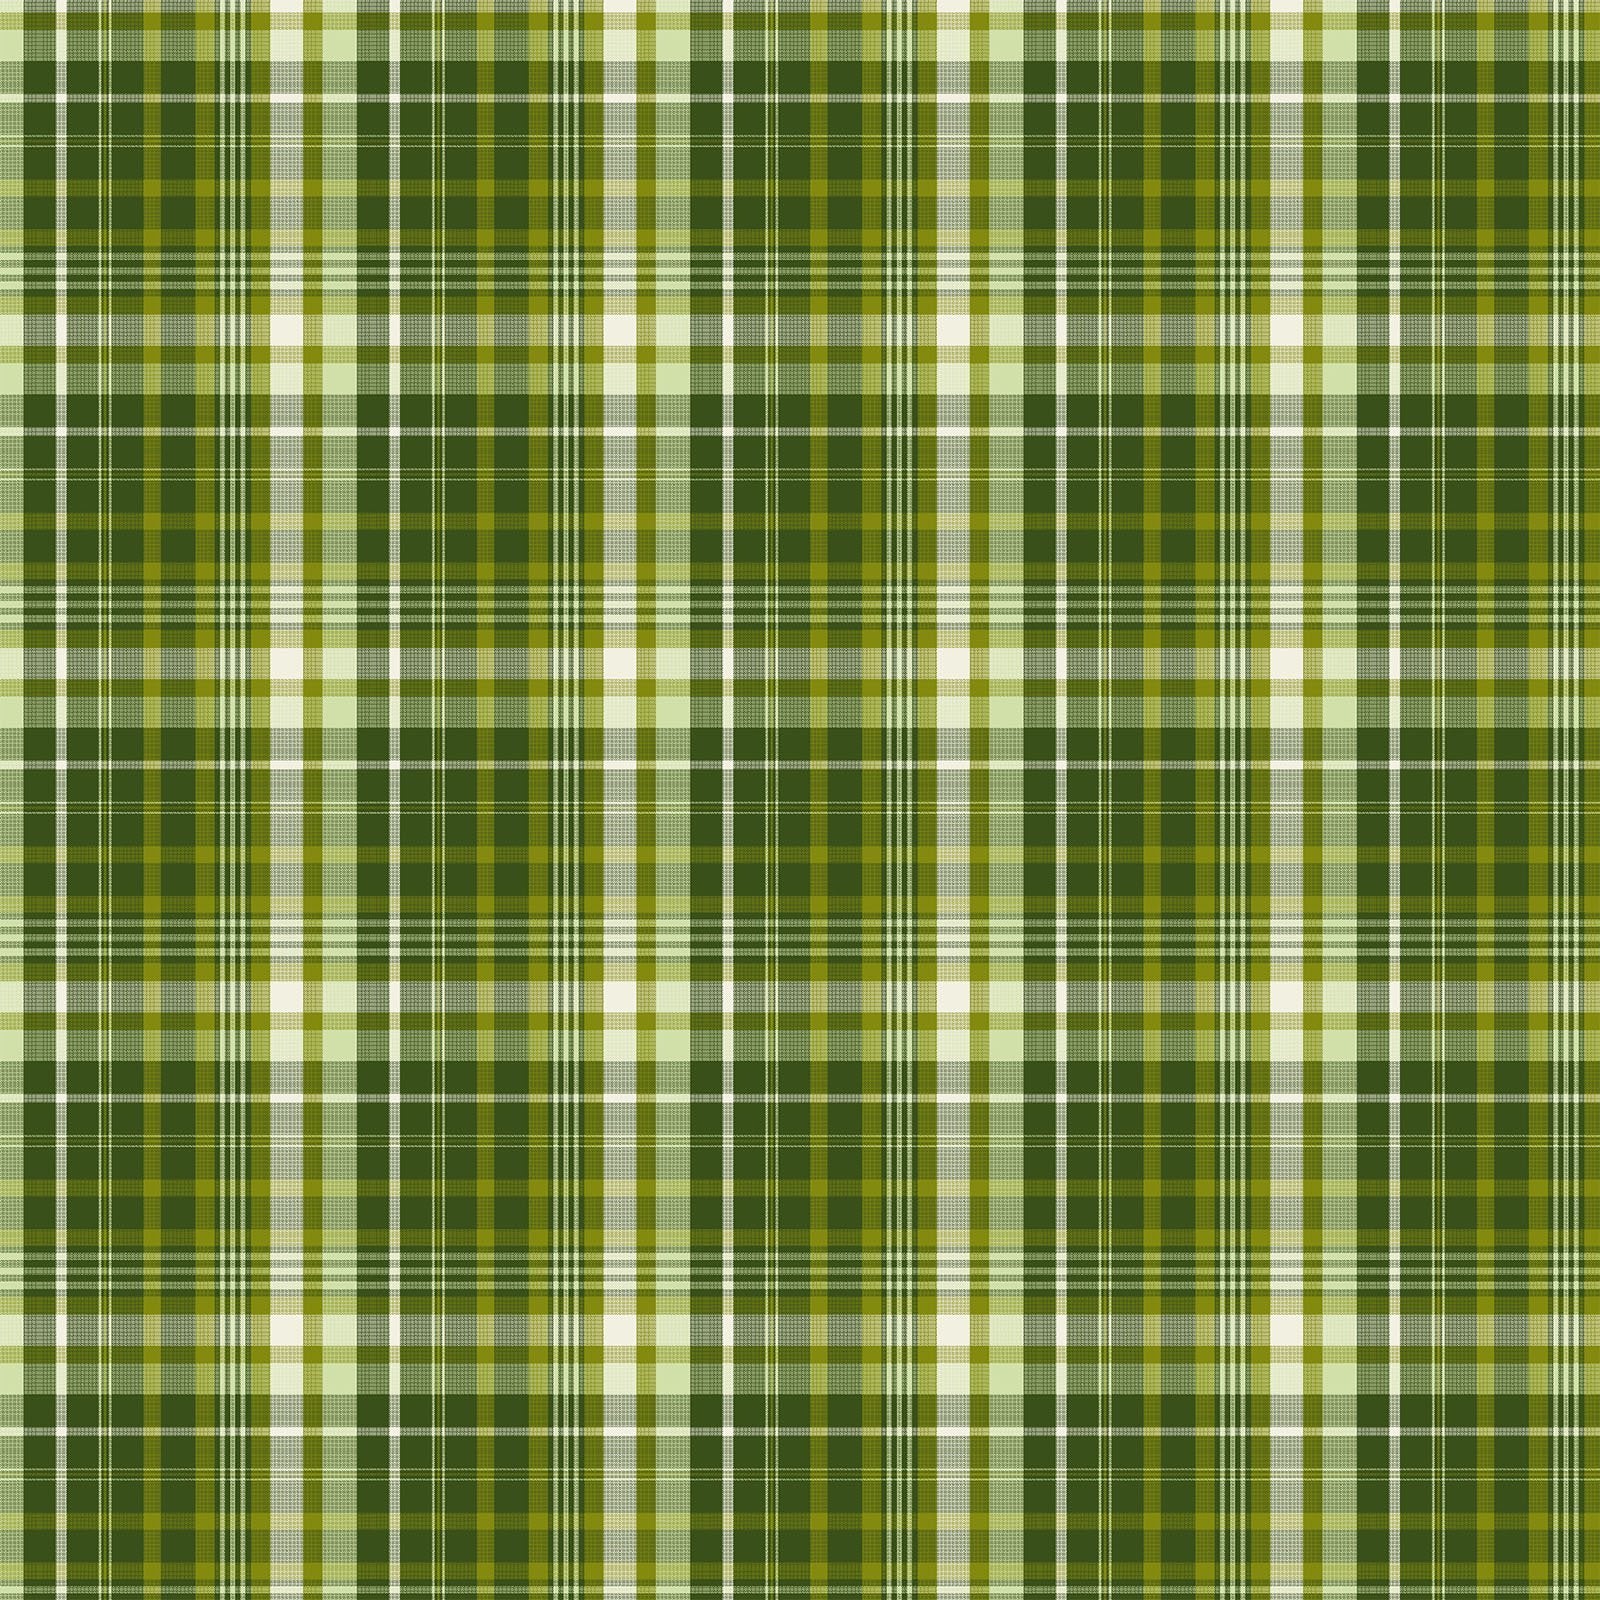 Cats N Quilts - Plaid Happy Green - Licence To Quilt